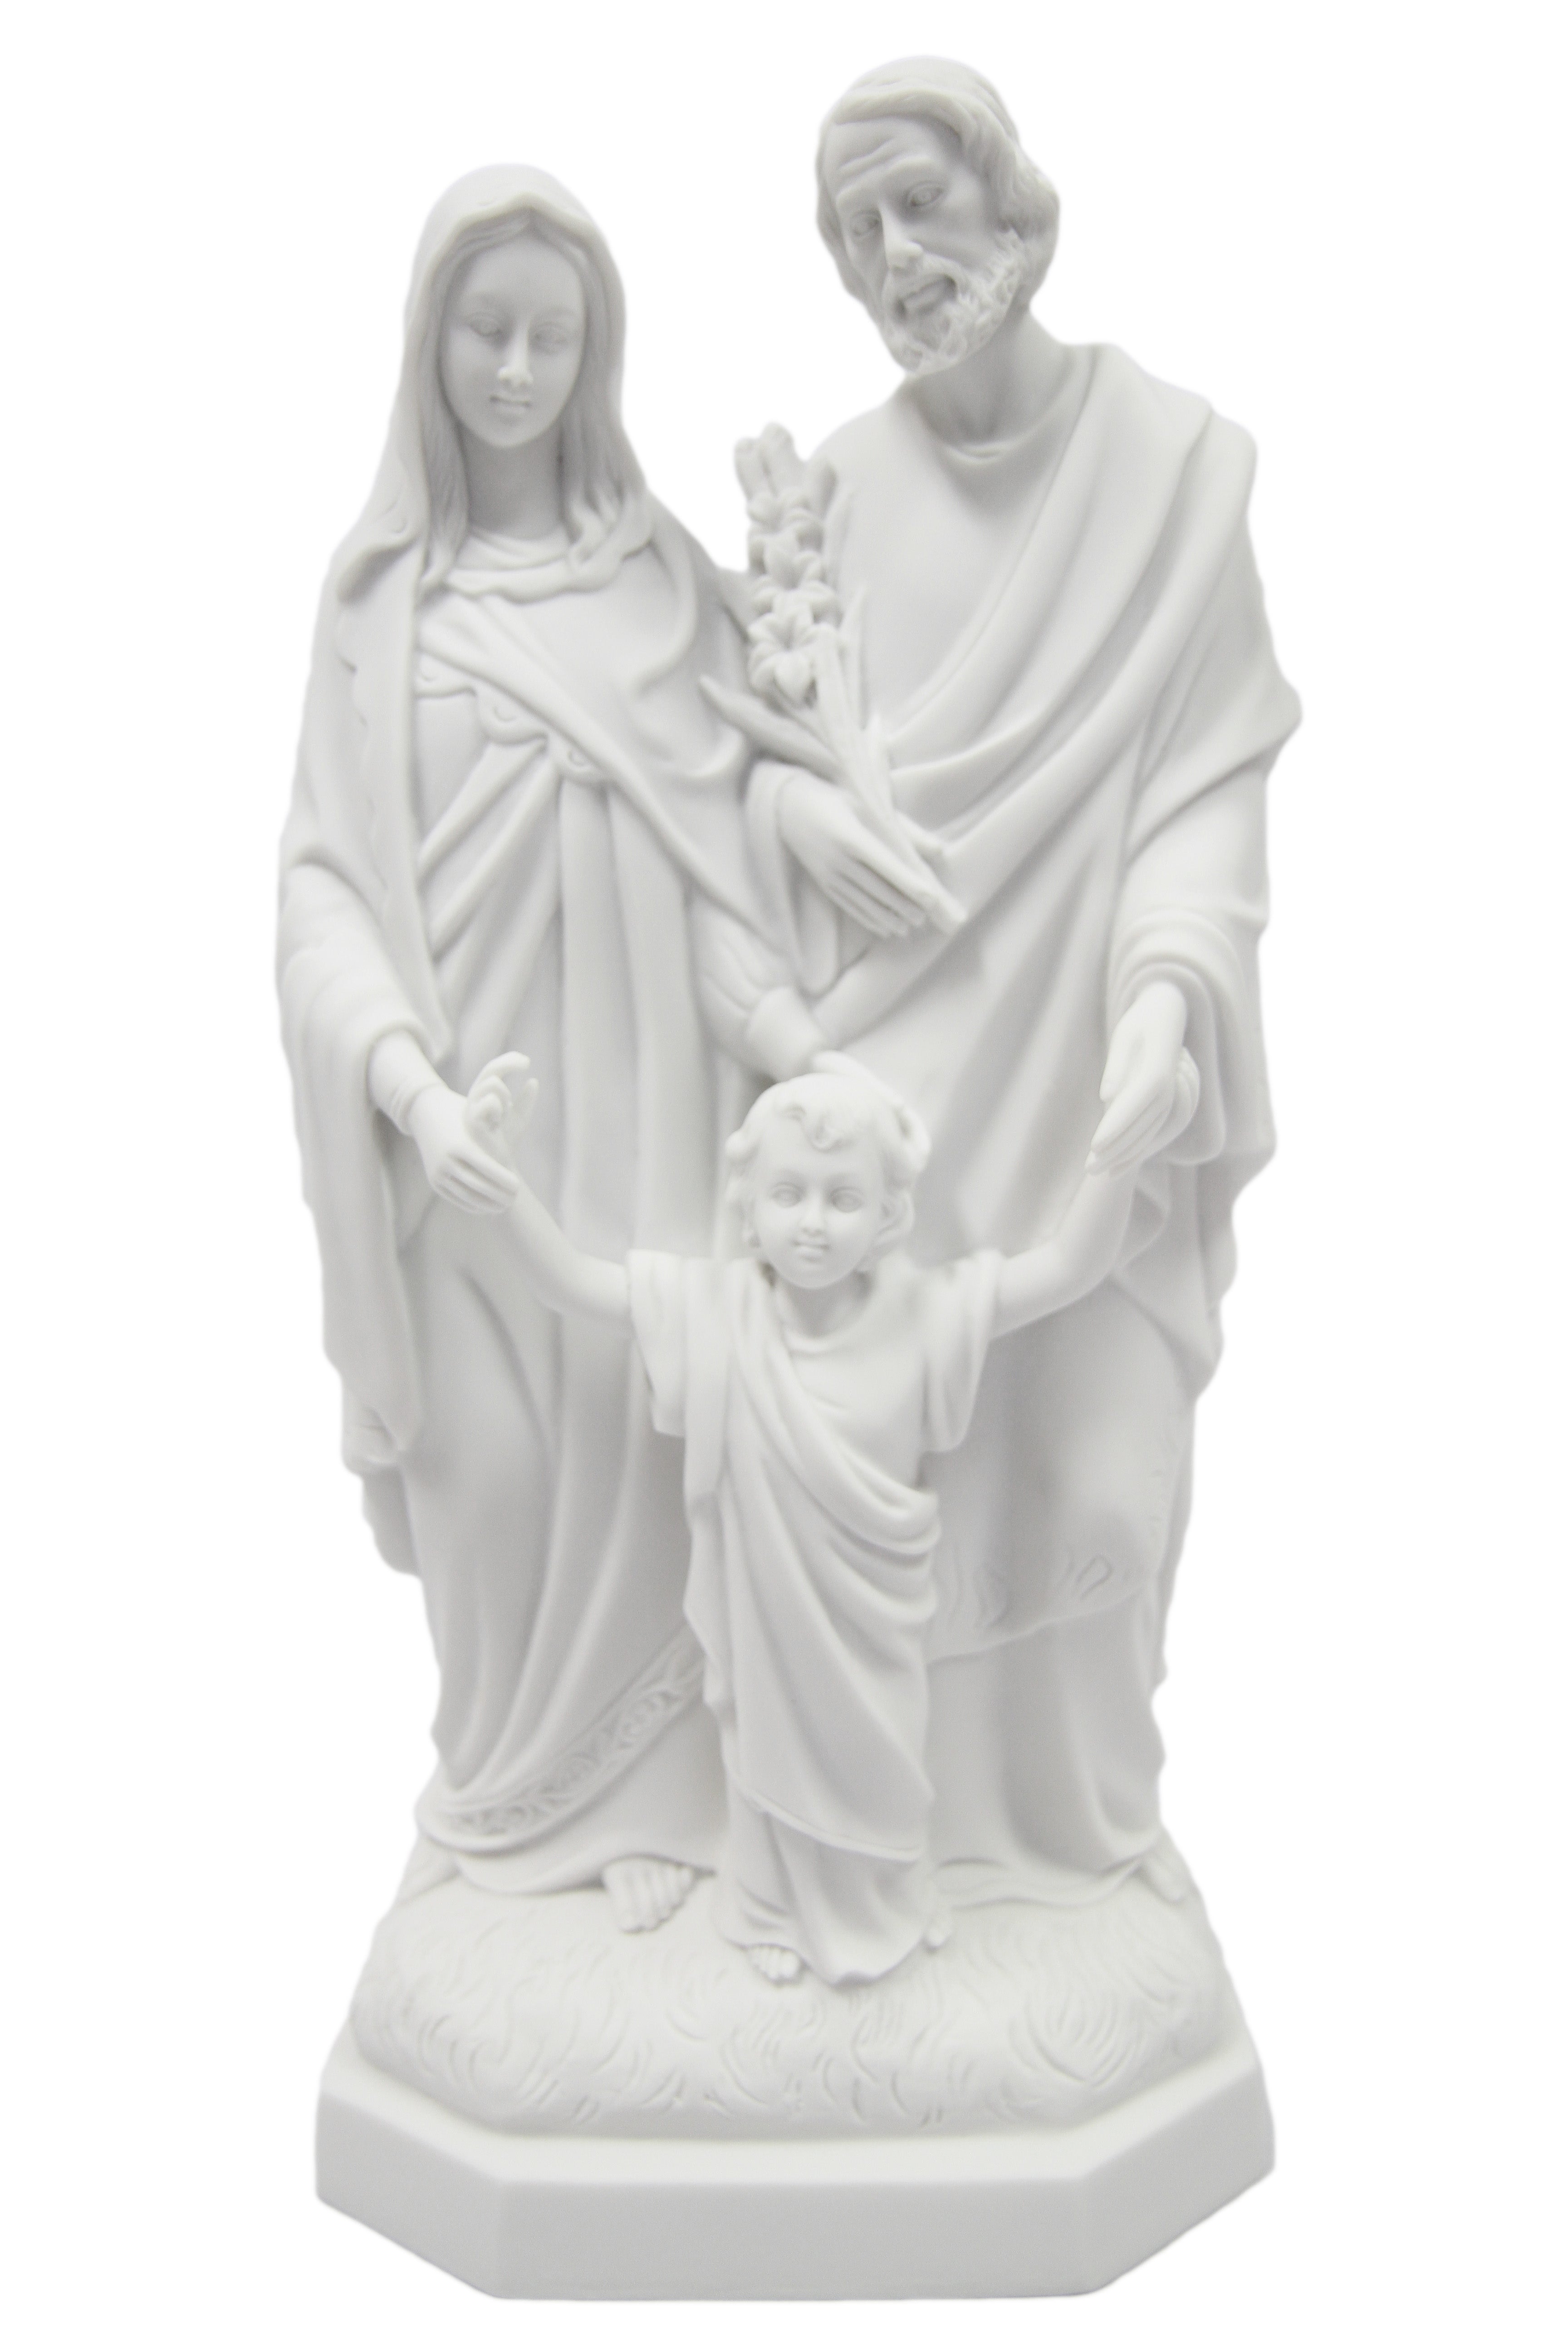 15 Inch Holy Family Catholic Statue of Joseph Mary Jesus Religious Vittoria Collection Made in Italy